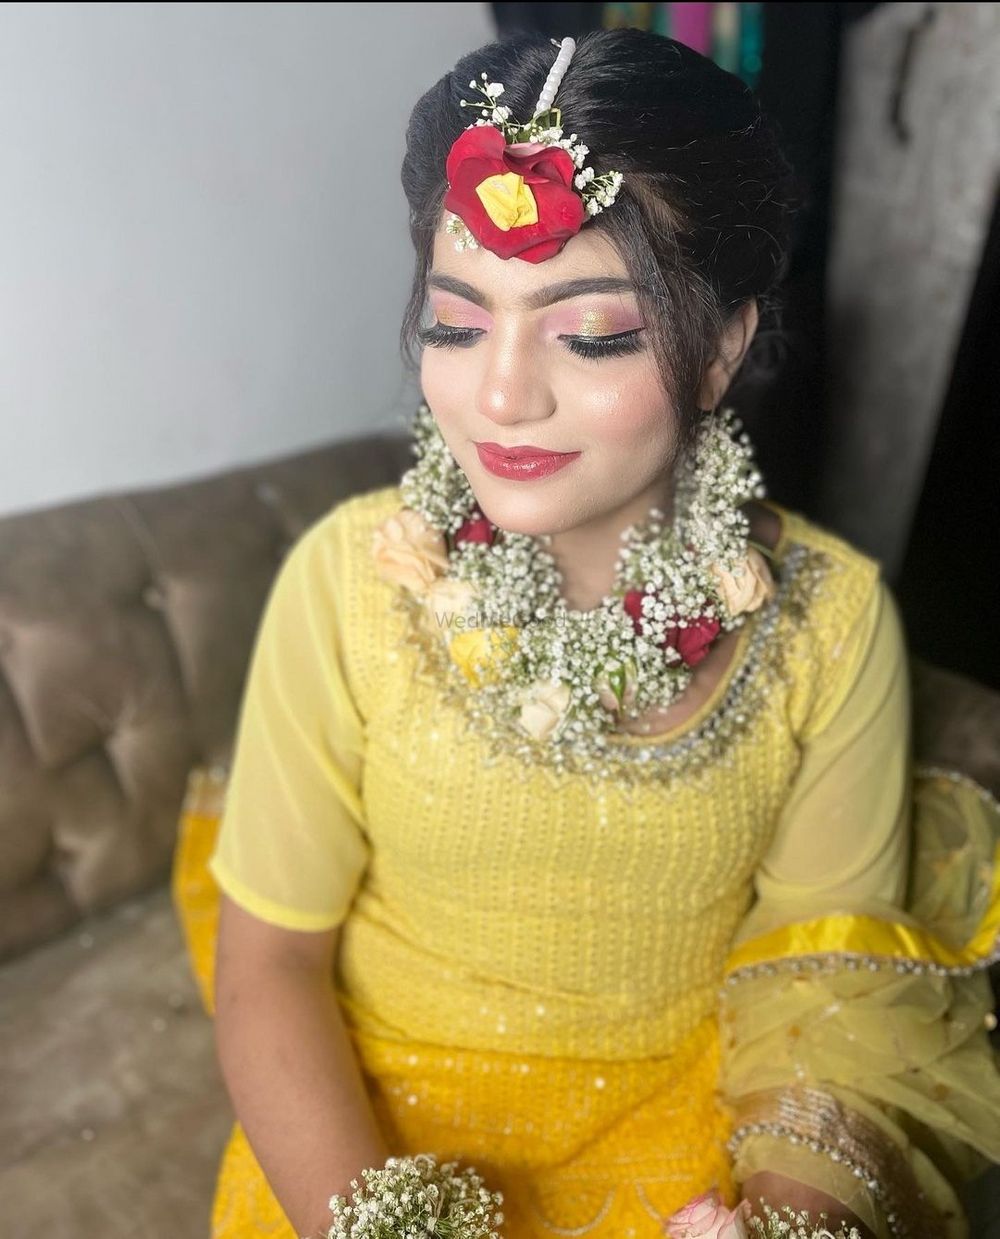 Photo From Haldi / Mehandi bride's - By Brown Beauty Makeovers